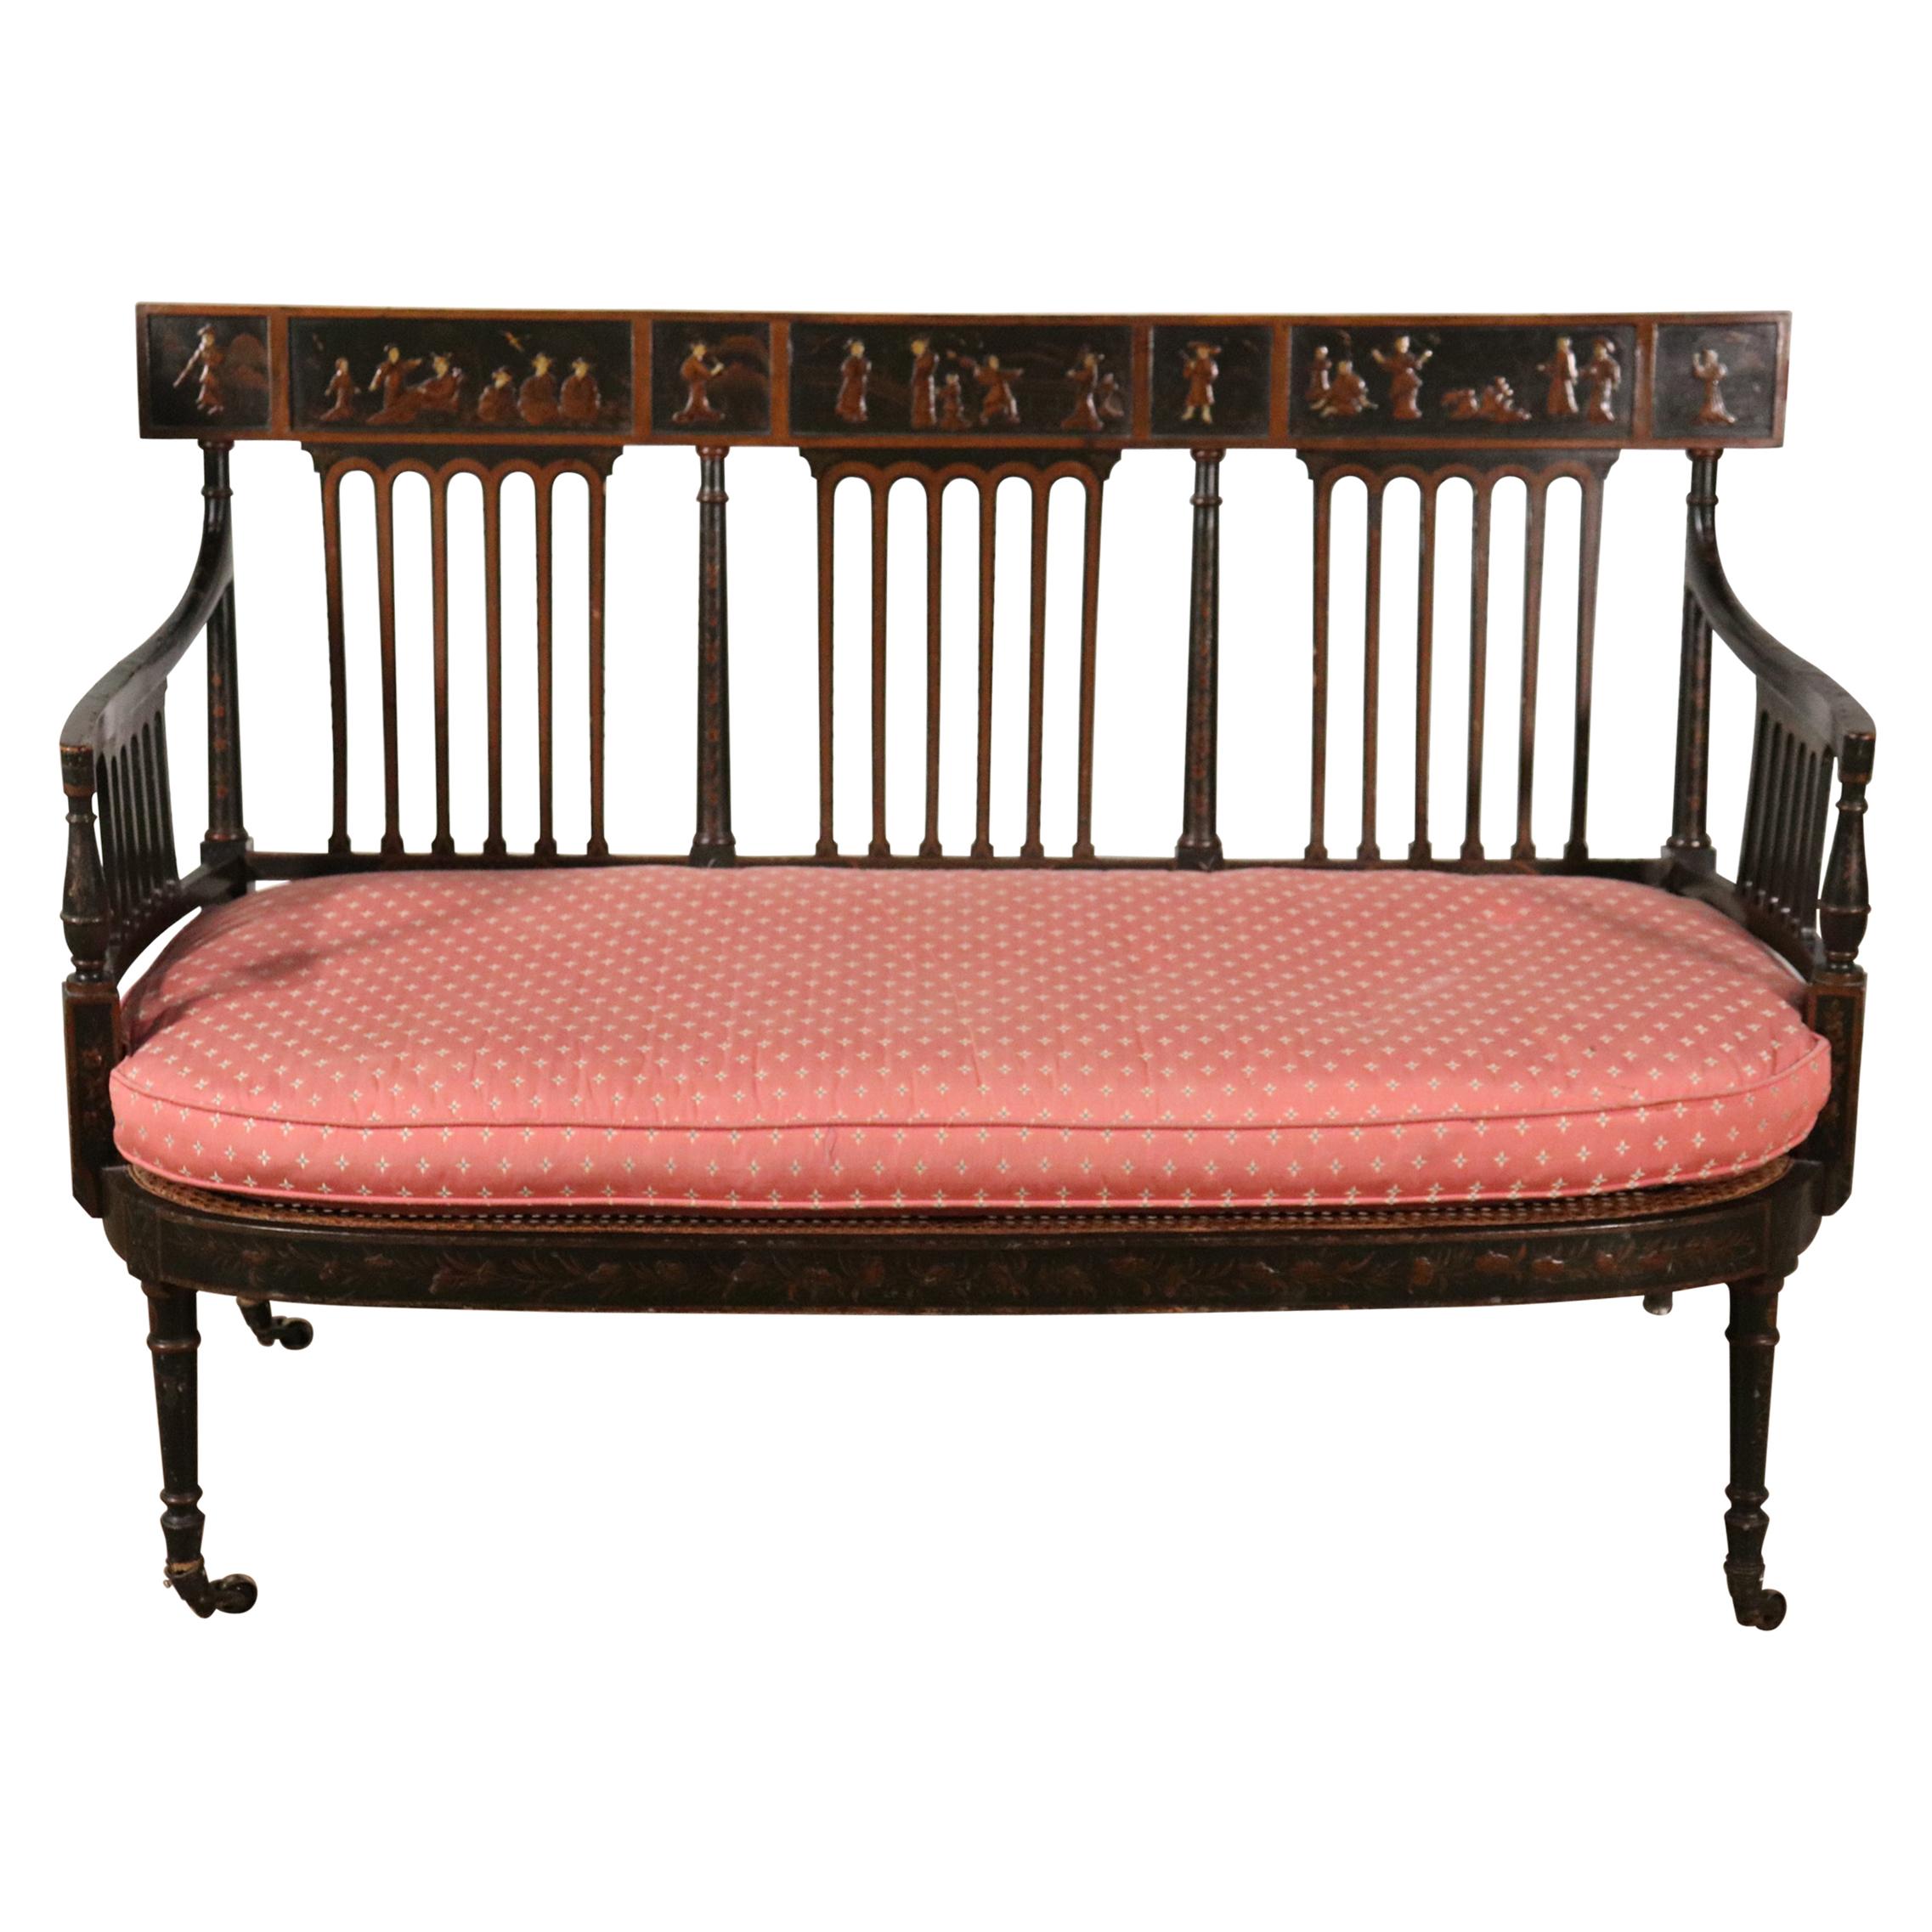 Unique English Edwardian Cane Seat Chinoiserie Paint Decorated Settee Loveseat